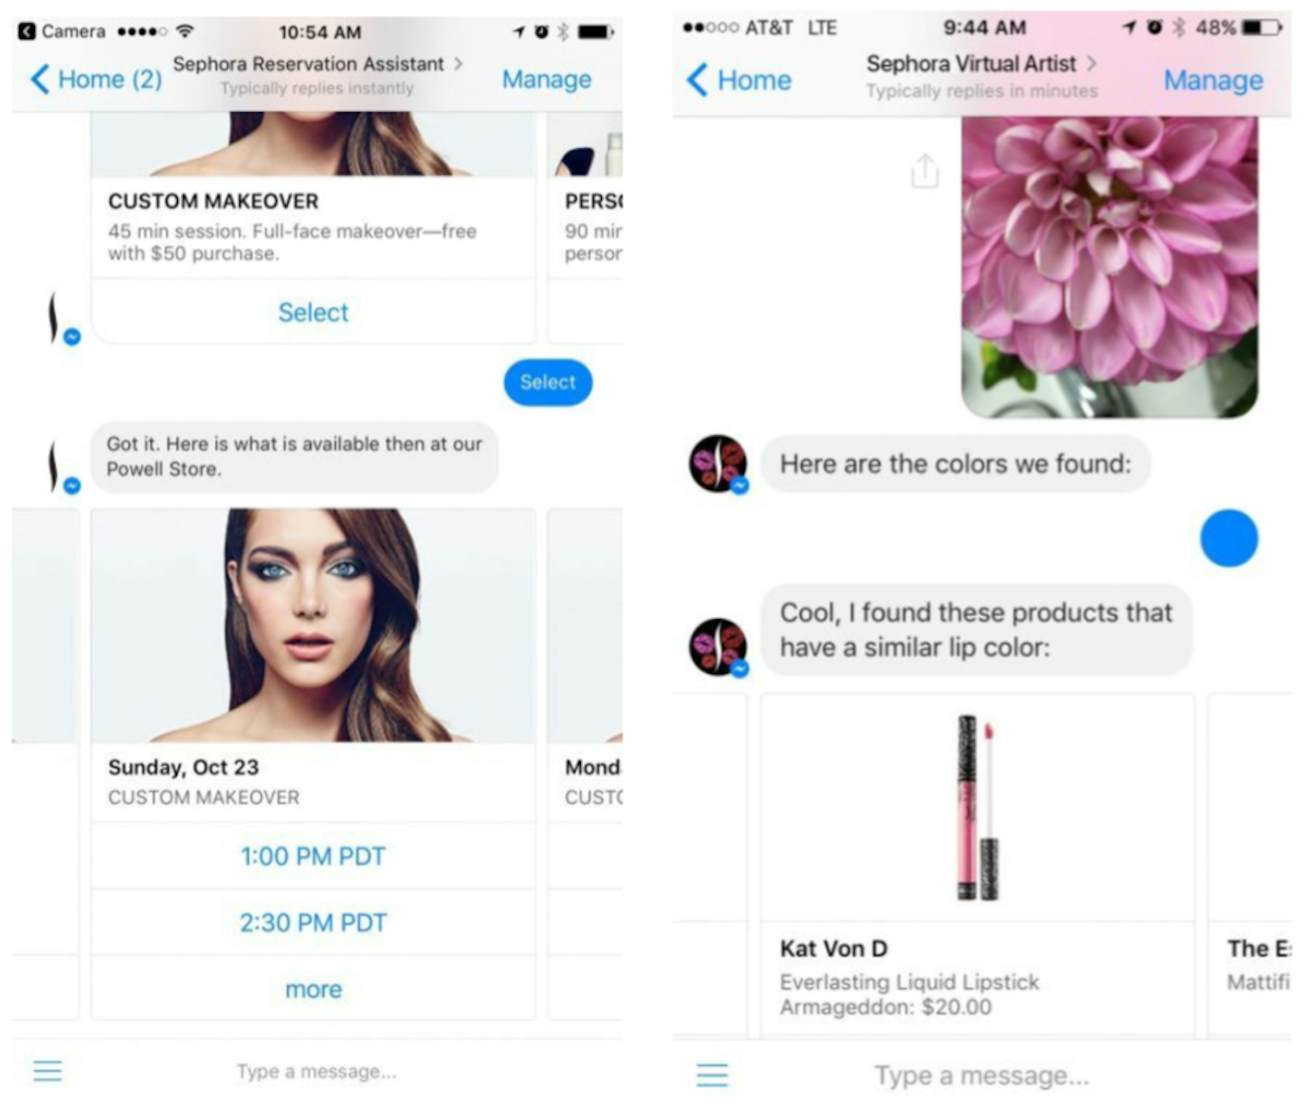 Sephora's machine learning-powered social media customer service chatbot  